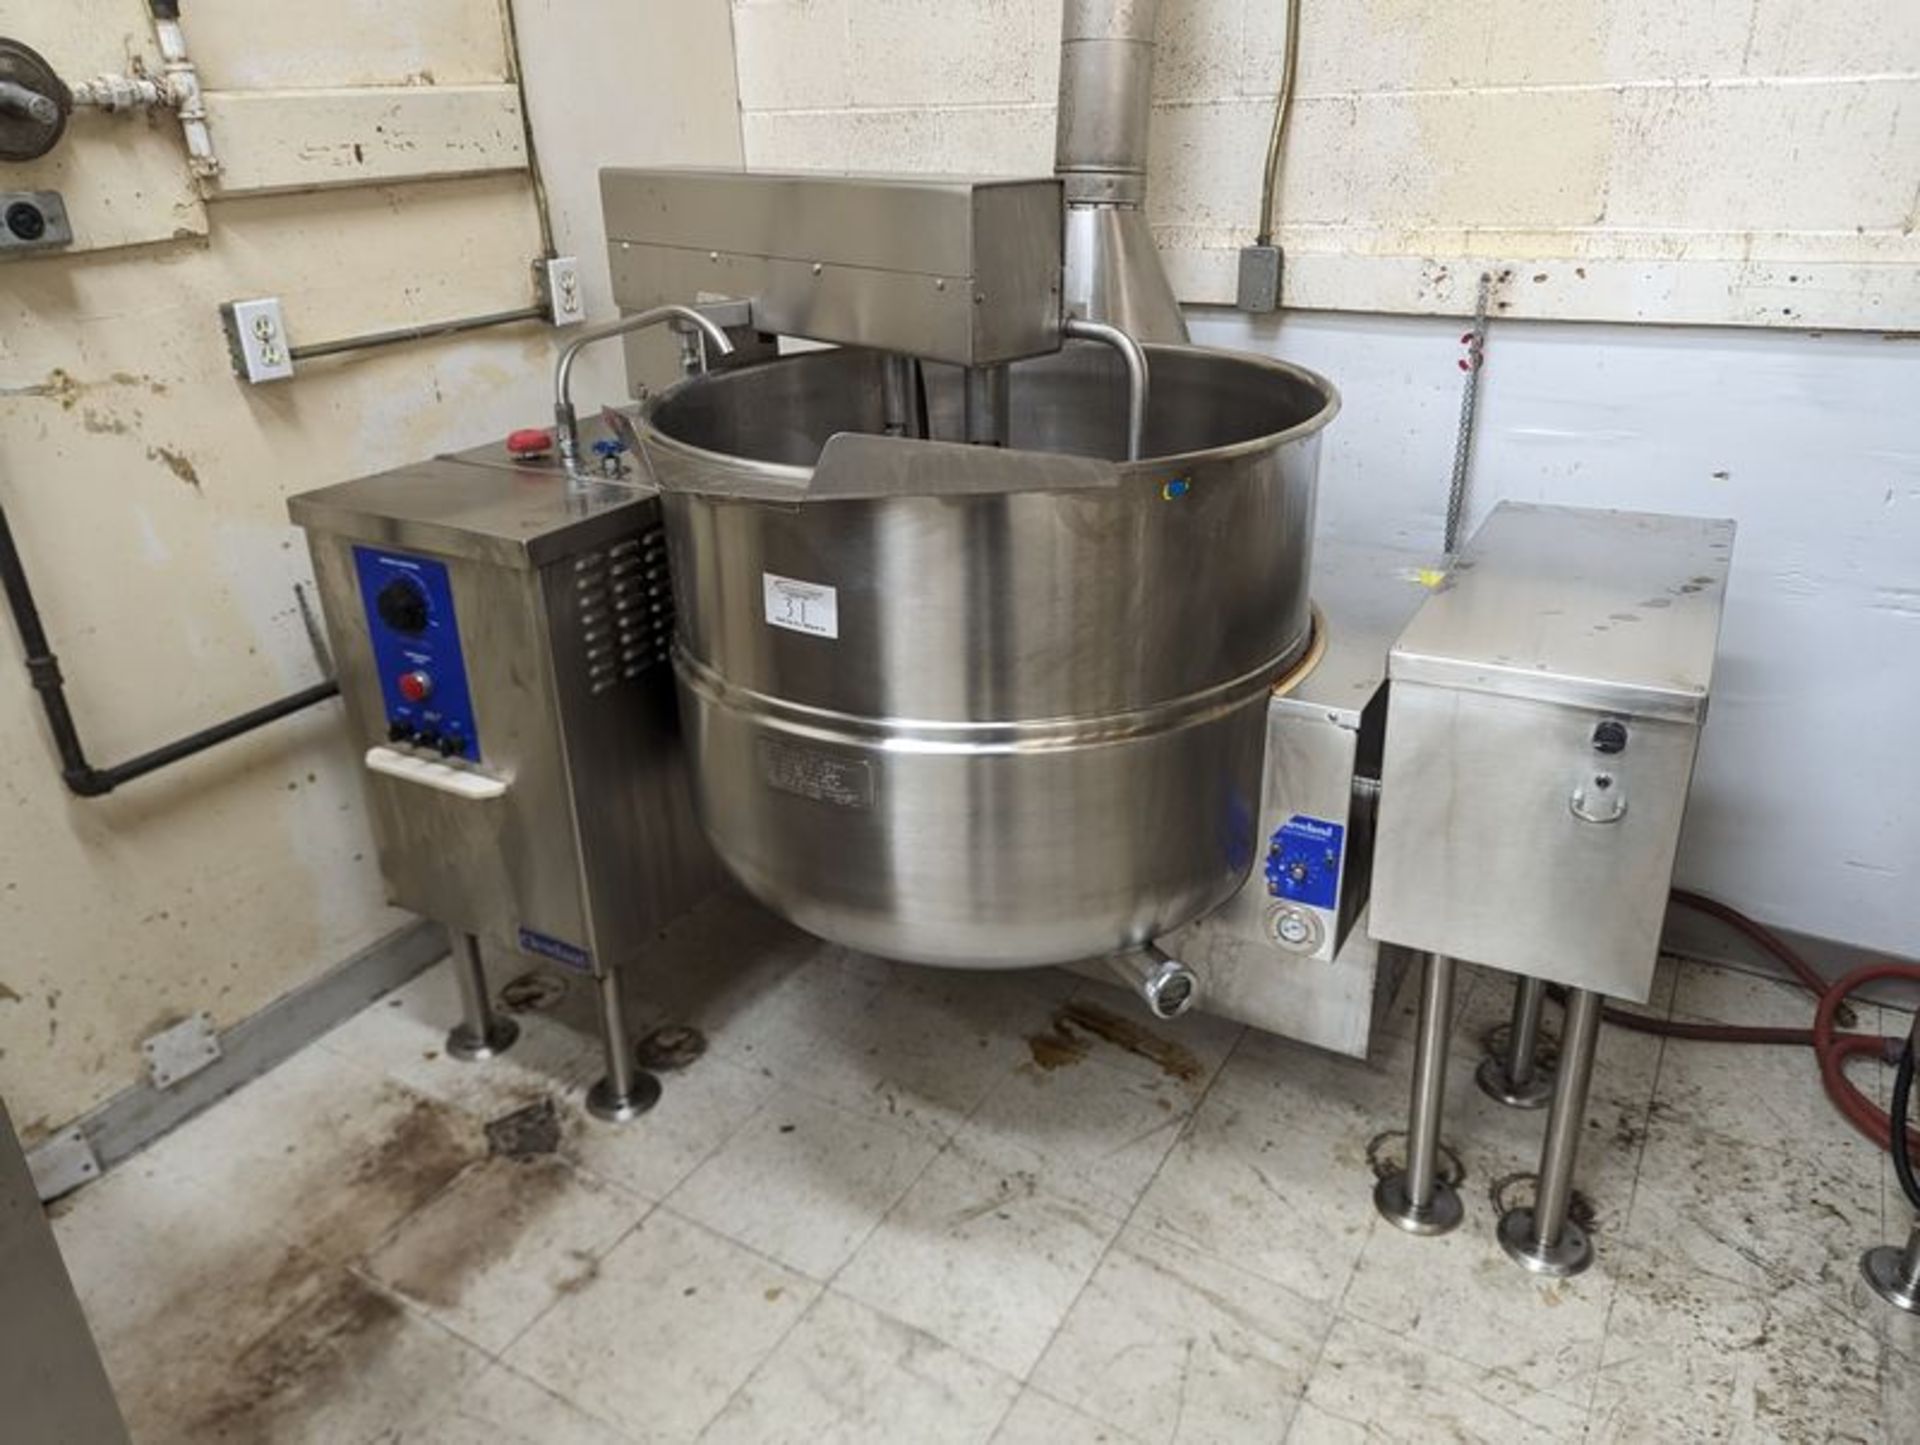 Cleveland Model MKGL-80T Gas Kettle with Mixer. Replacement Cost over $100,000.00